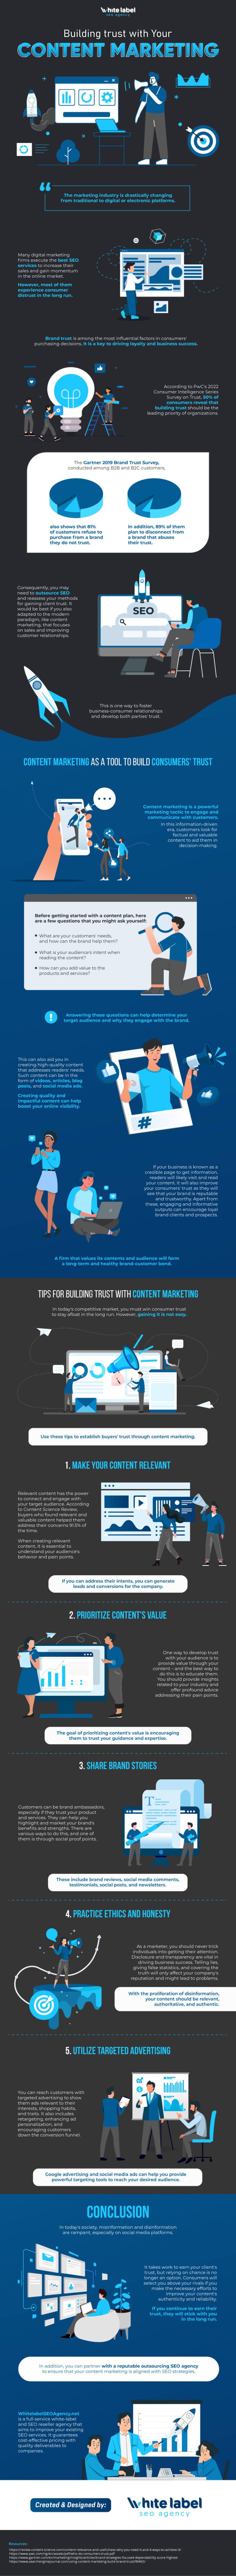 Infographic van White Label SEO Agency: building trust with your content marketing.